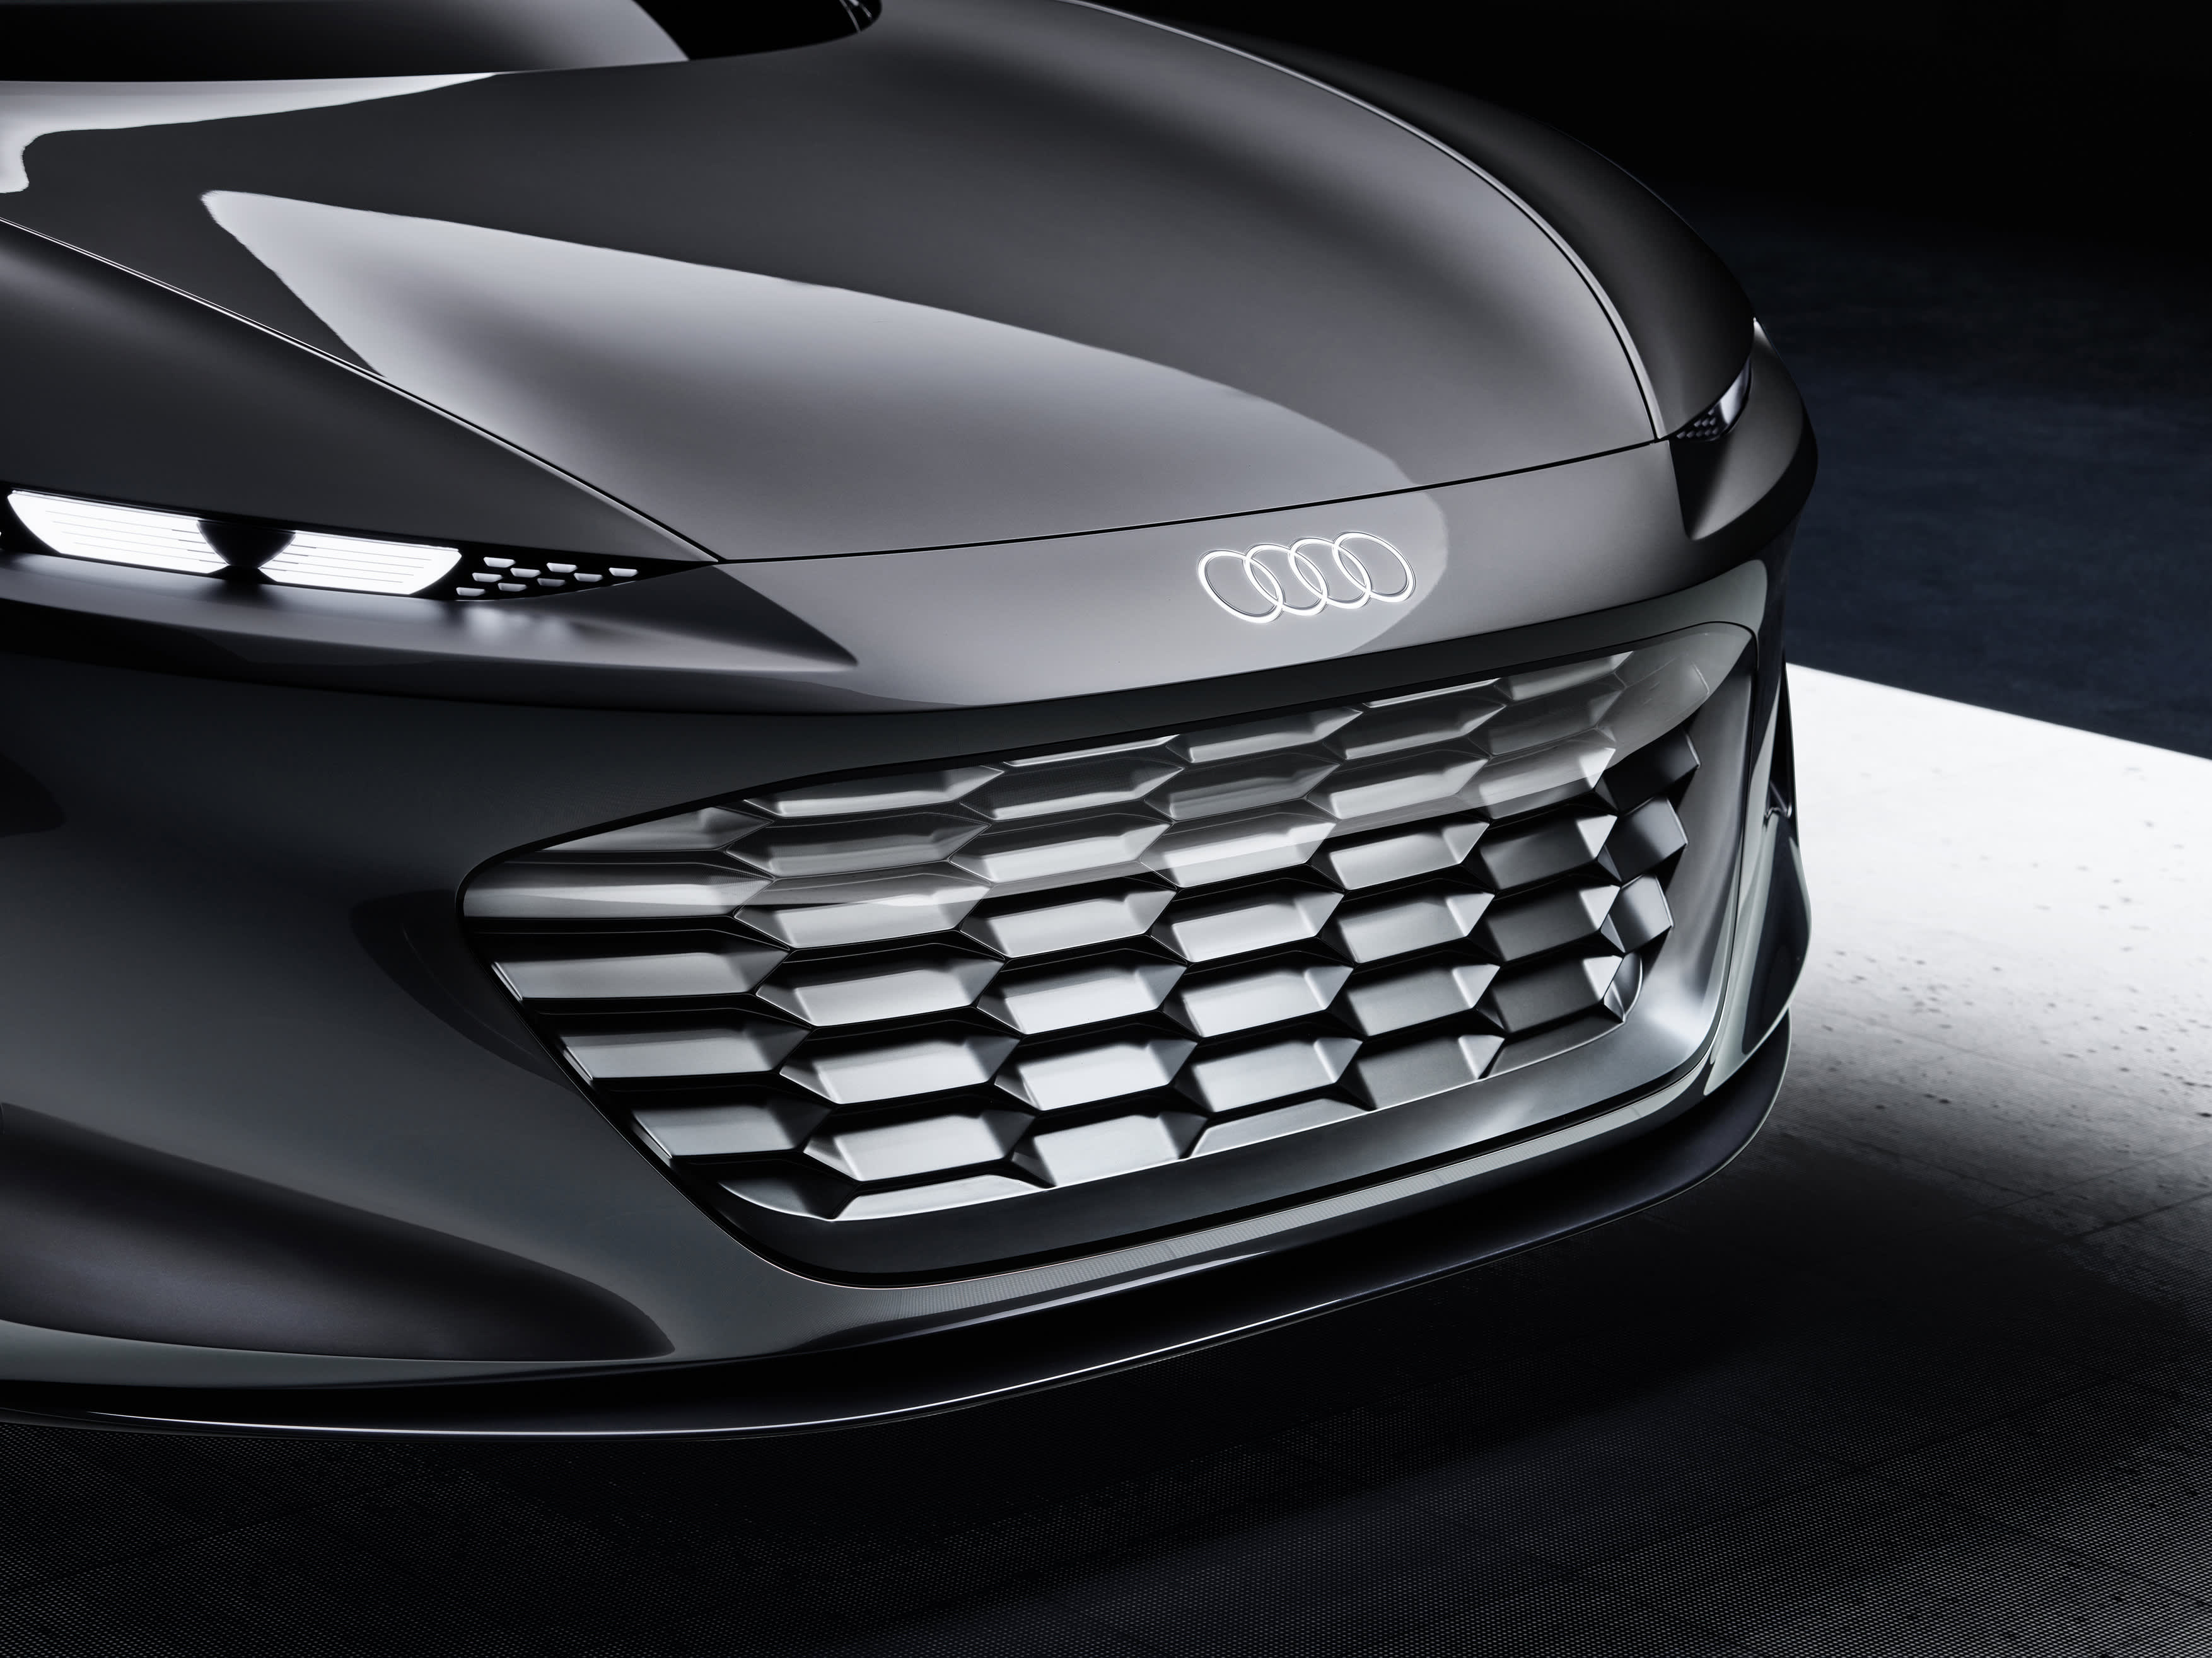 Audi unveils new Grandsphere concept car as a 'private jet for the road'